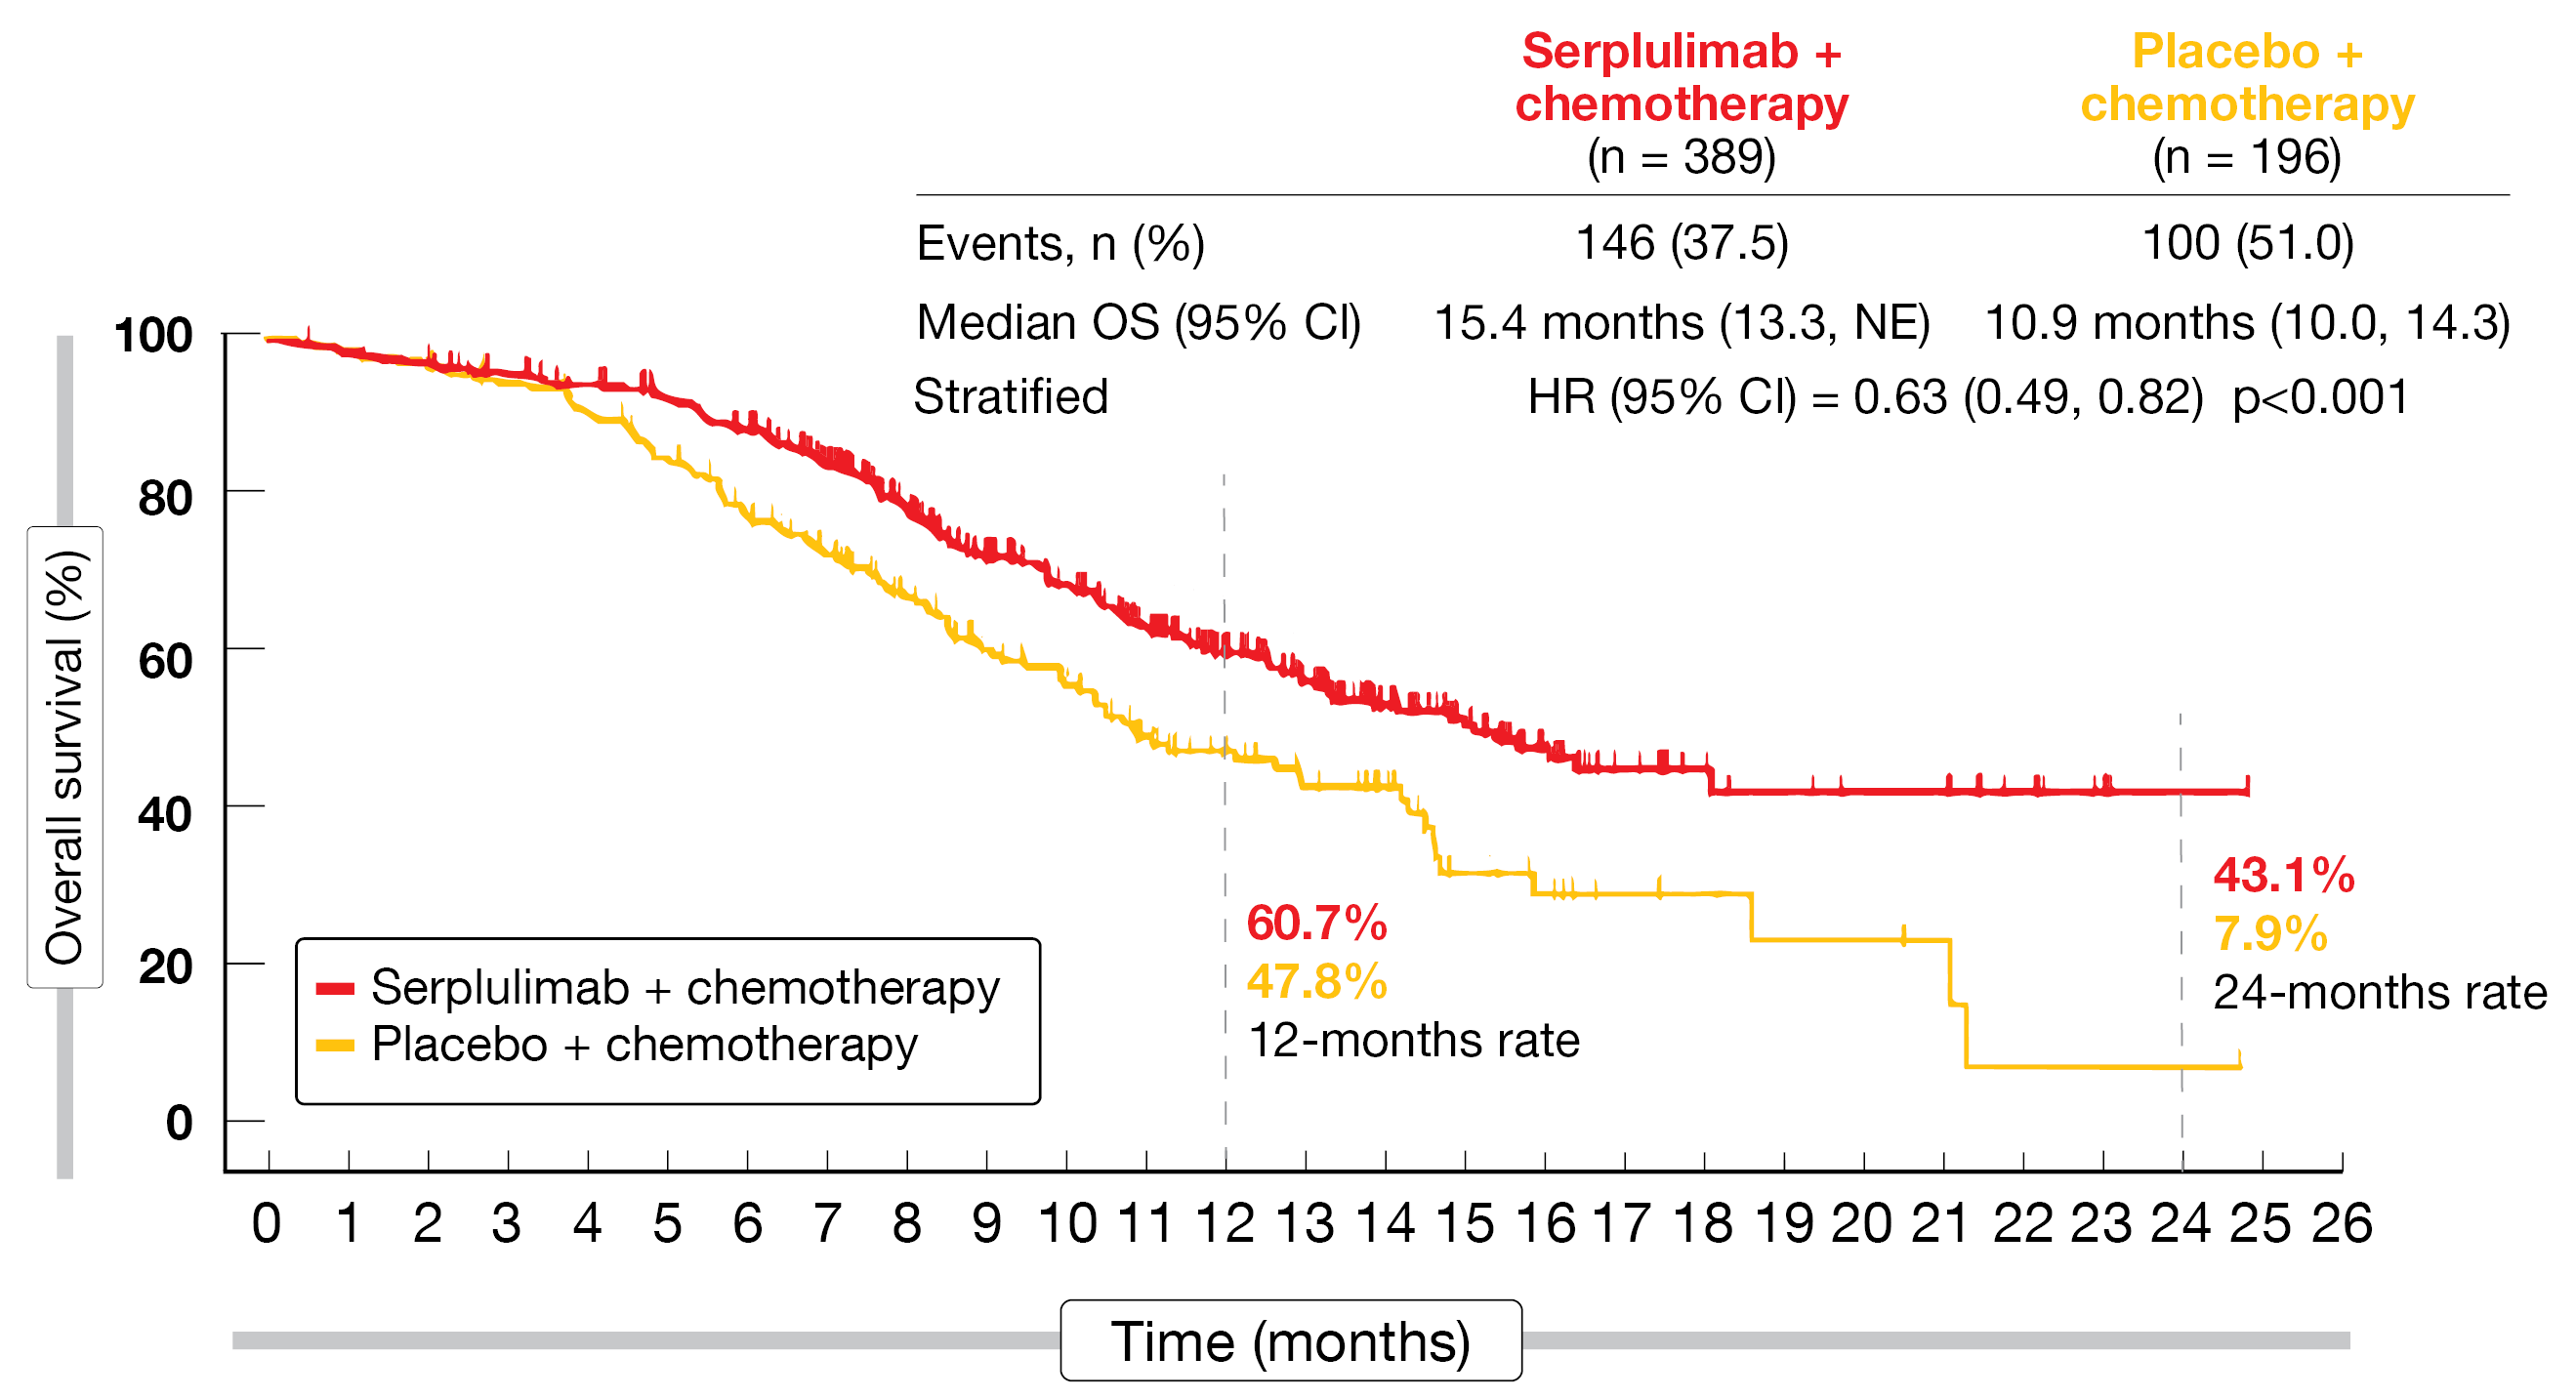 Figure 1: Survival improvement with serplulimab plus chemotherapy versus placebo plus chemotherapy